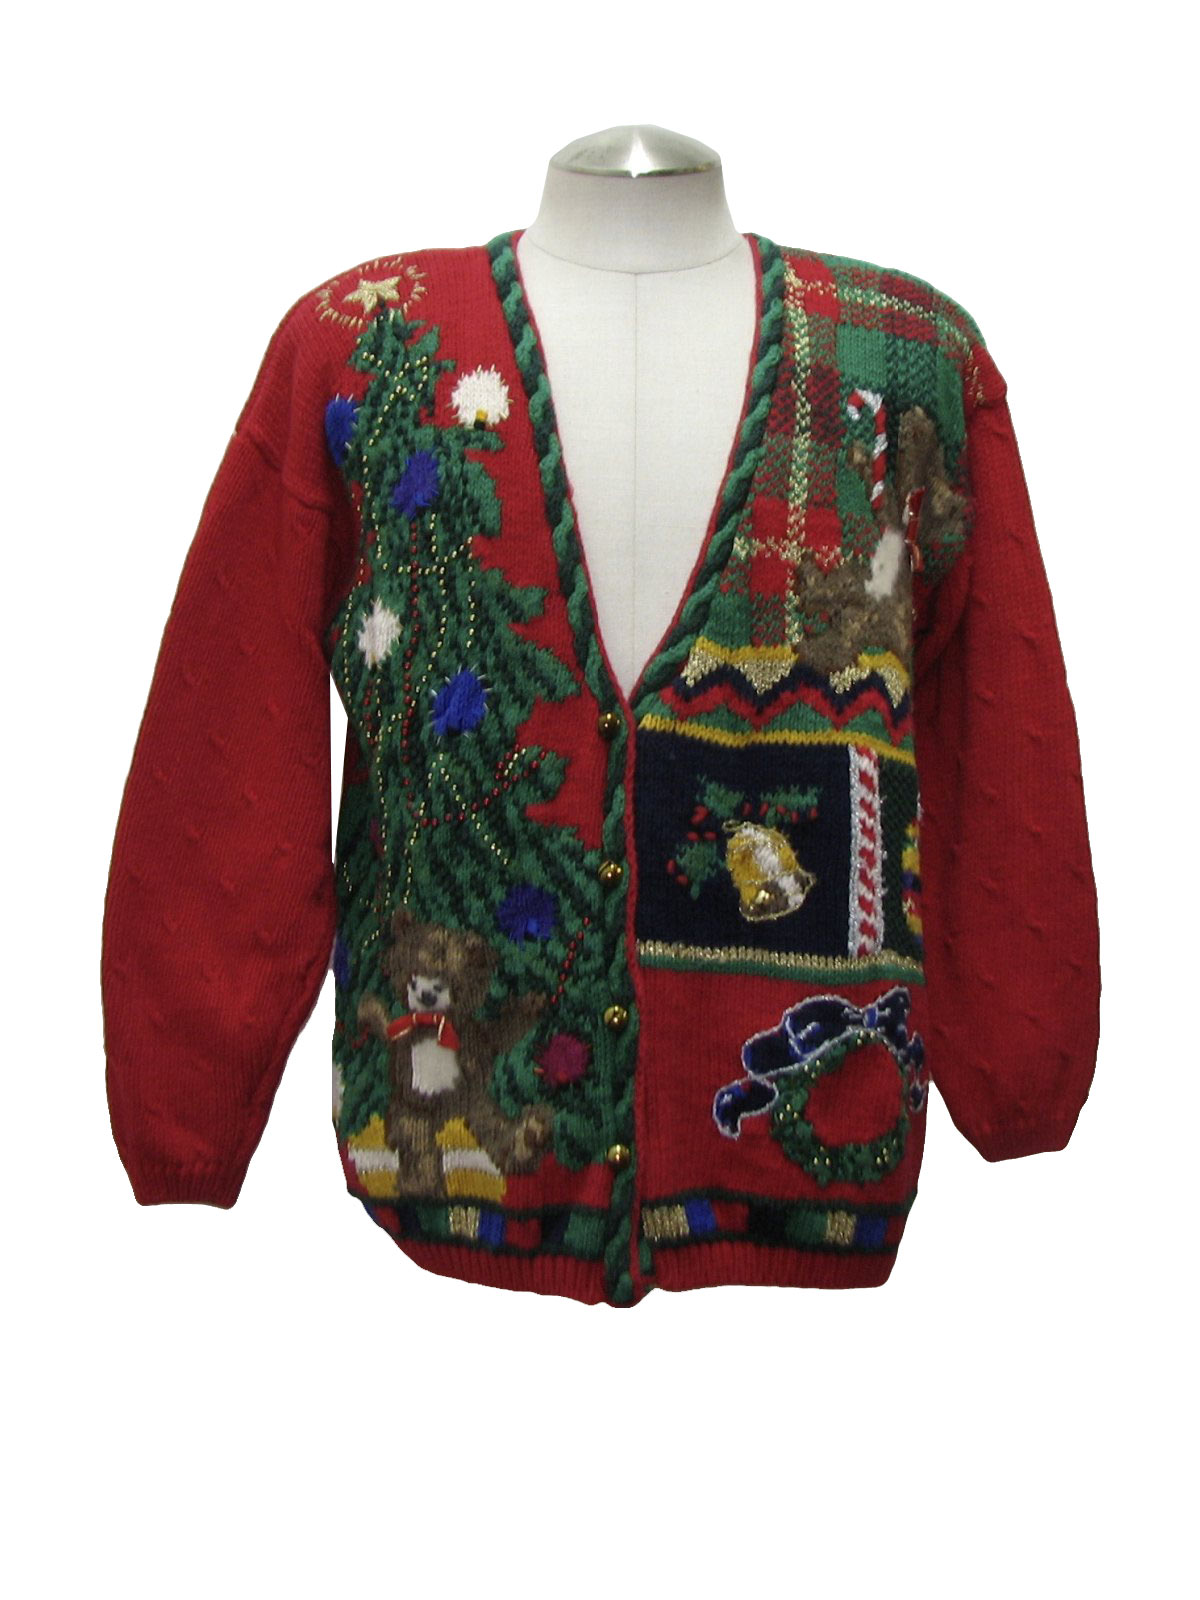 Ugly Christmas Cardigan Sweater: -Casual Corner- Unisex red background ...